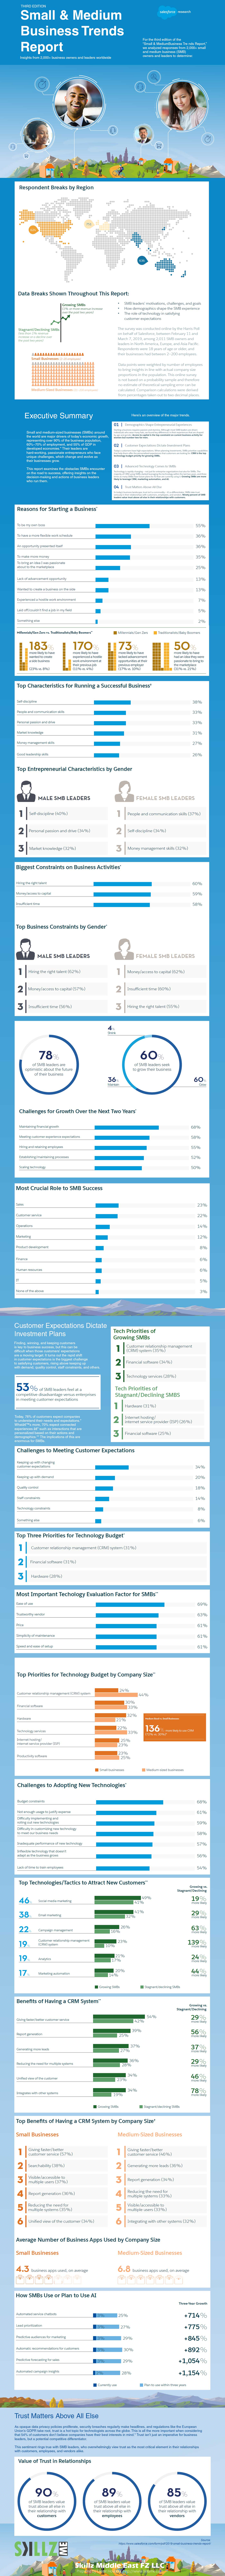 2019 Report - Small and Medium Business Trends Infographic